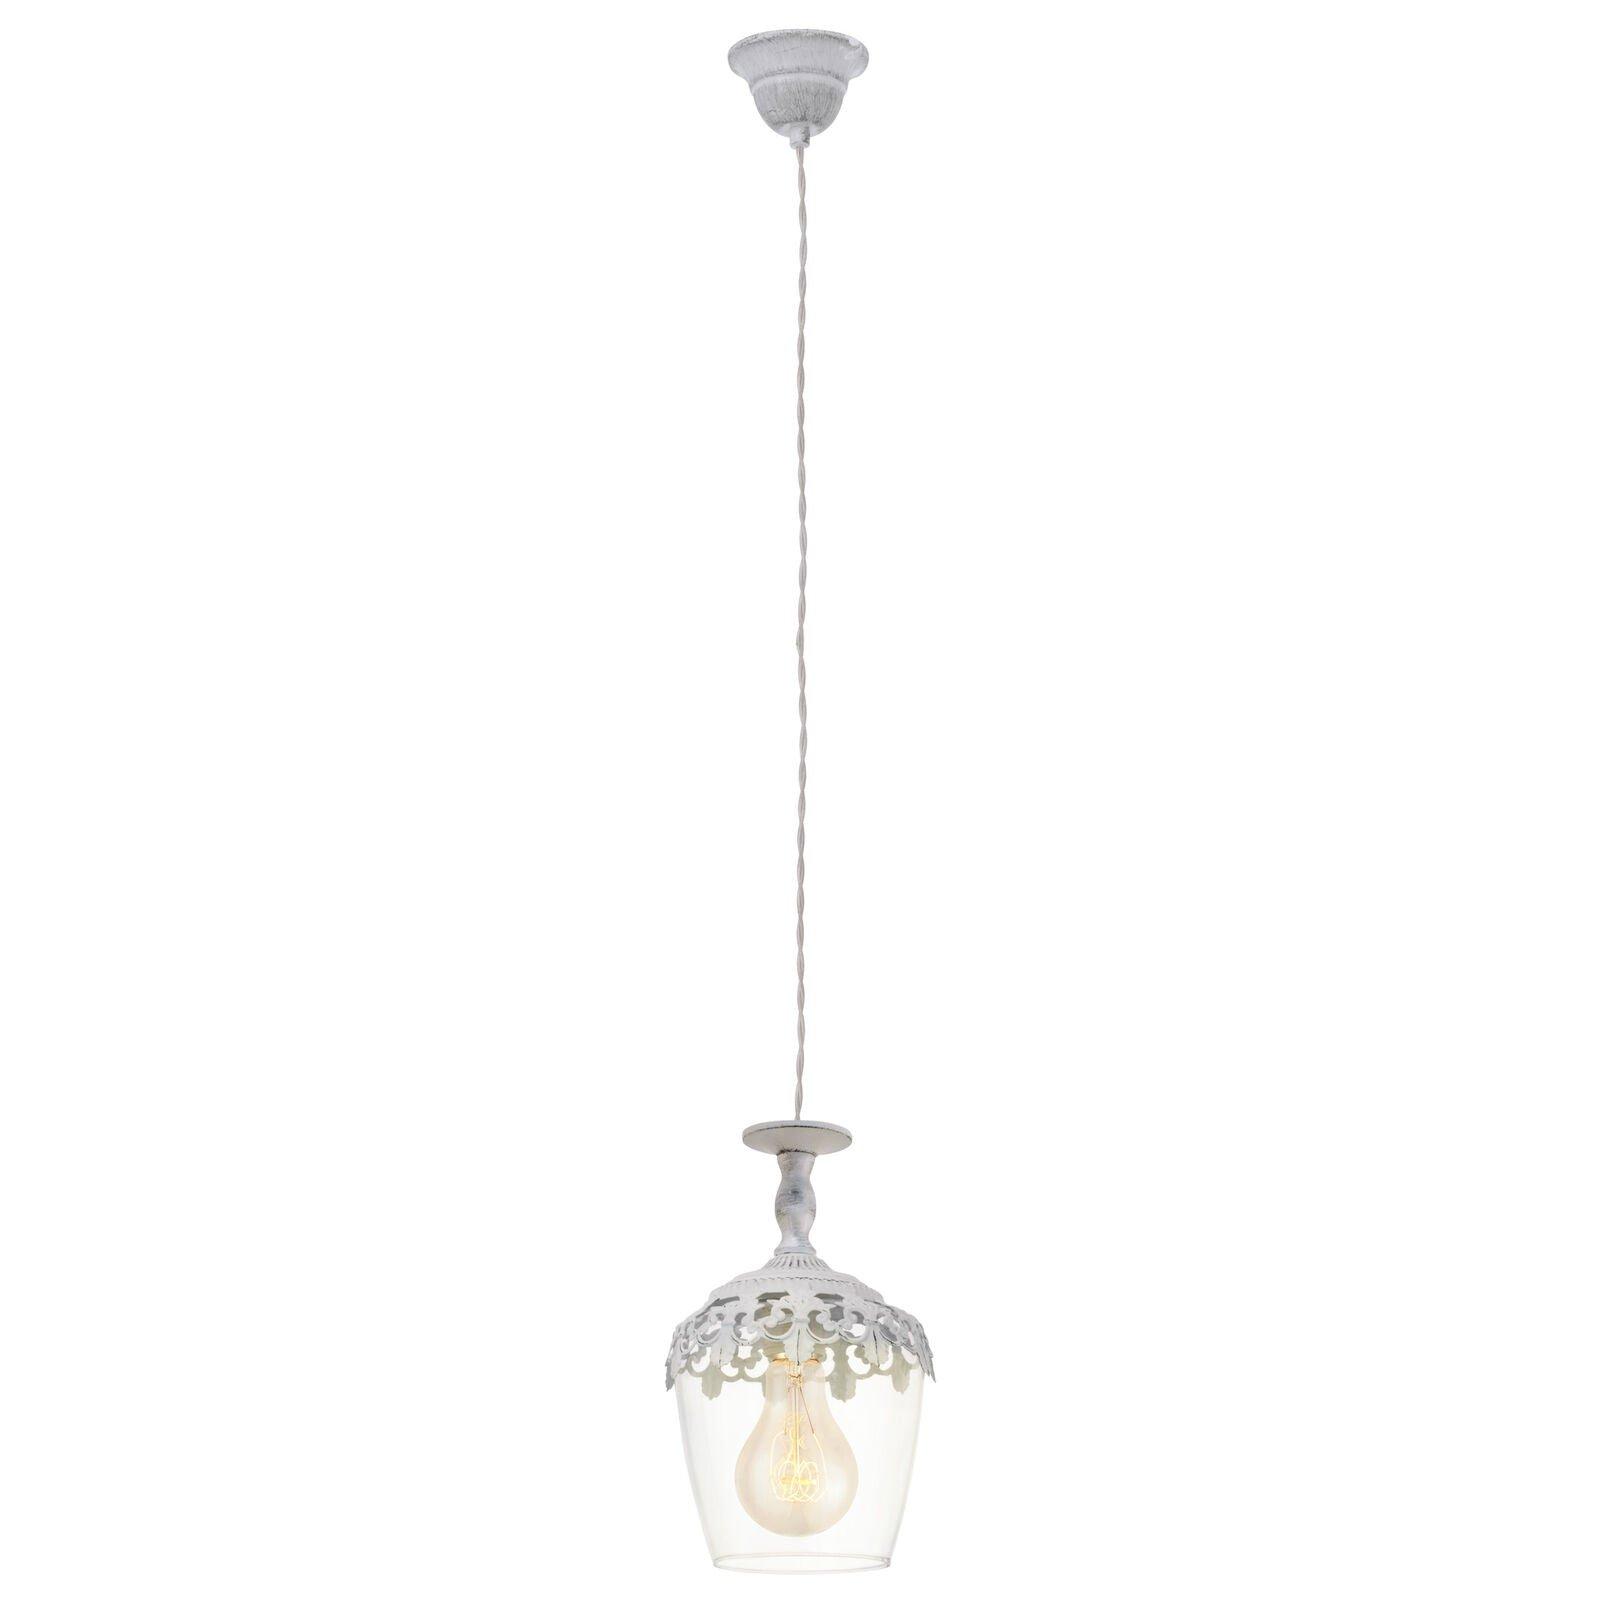 Hanging Ceiling Pendant Light White Patina & Glass Shade 1x E27 Feature Lamp